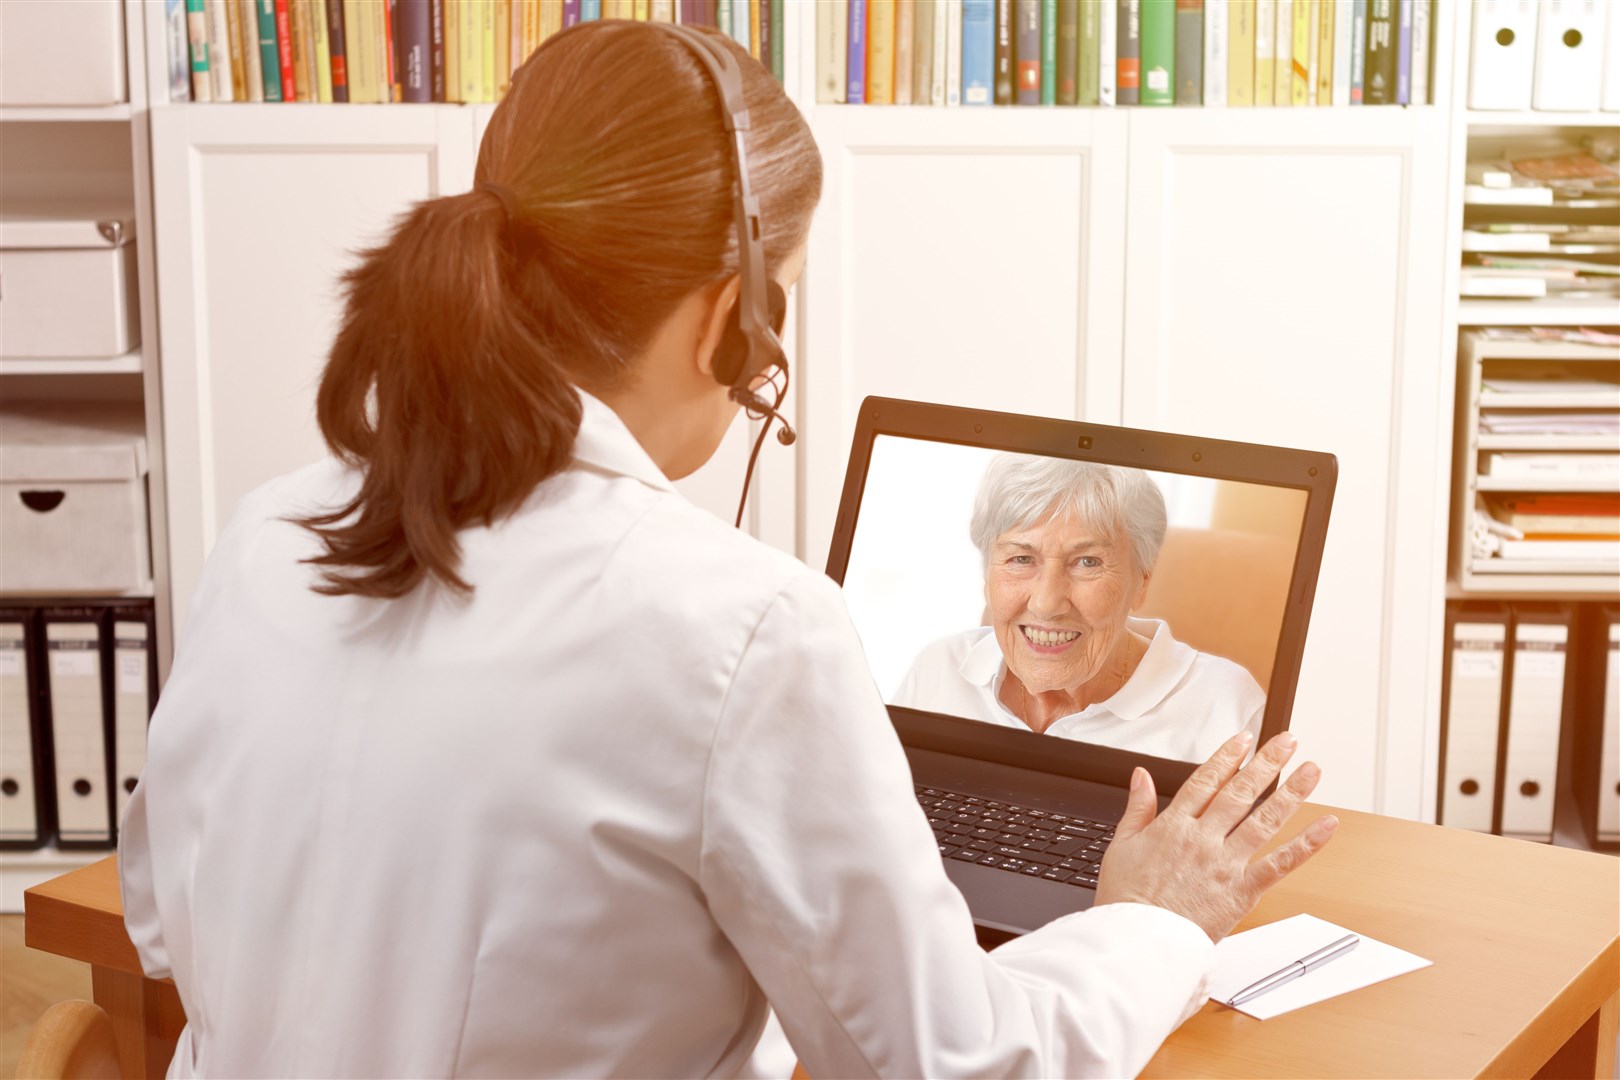 The Covid pandemic showed that video consultations are a convenient way of speaking to your GP.